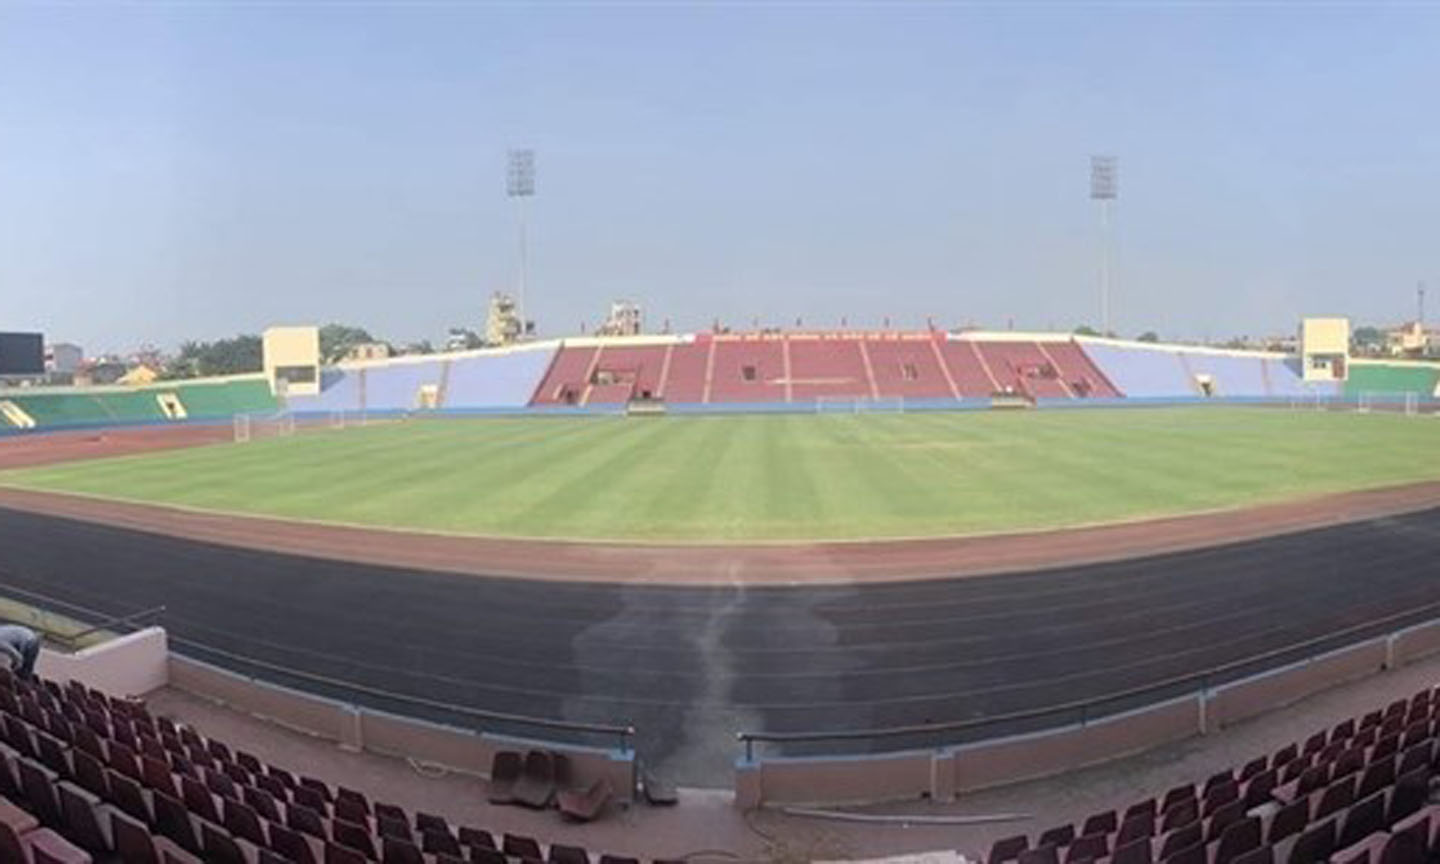 Viet Tri Stadium in Phu Tho province will host its first ever international football match, a friendly between the Vietnam and Myanmar U23 teams, on June 7. — Photo courtesy of VFF